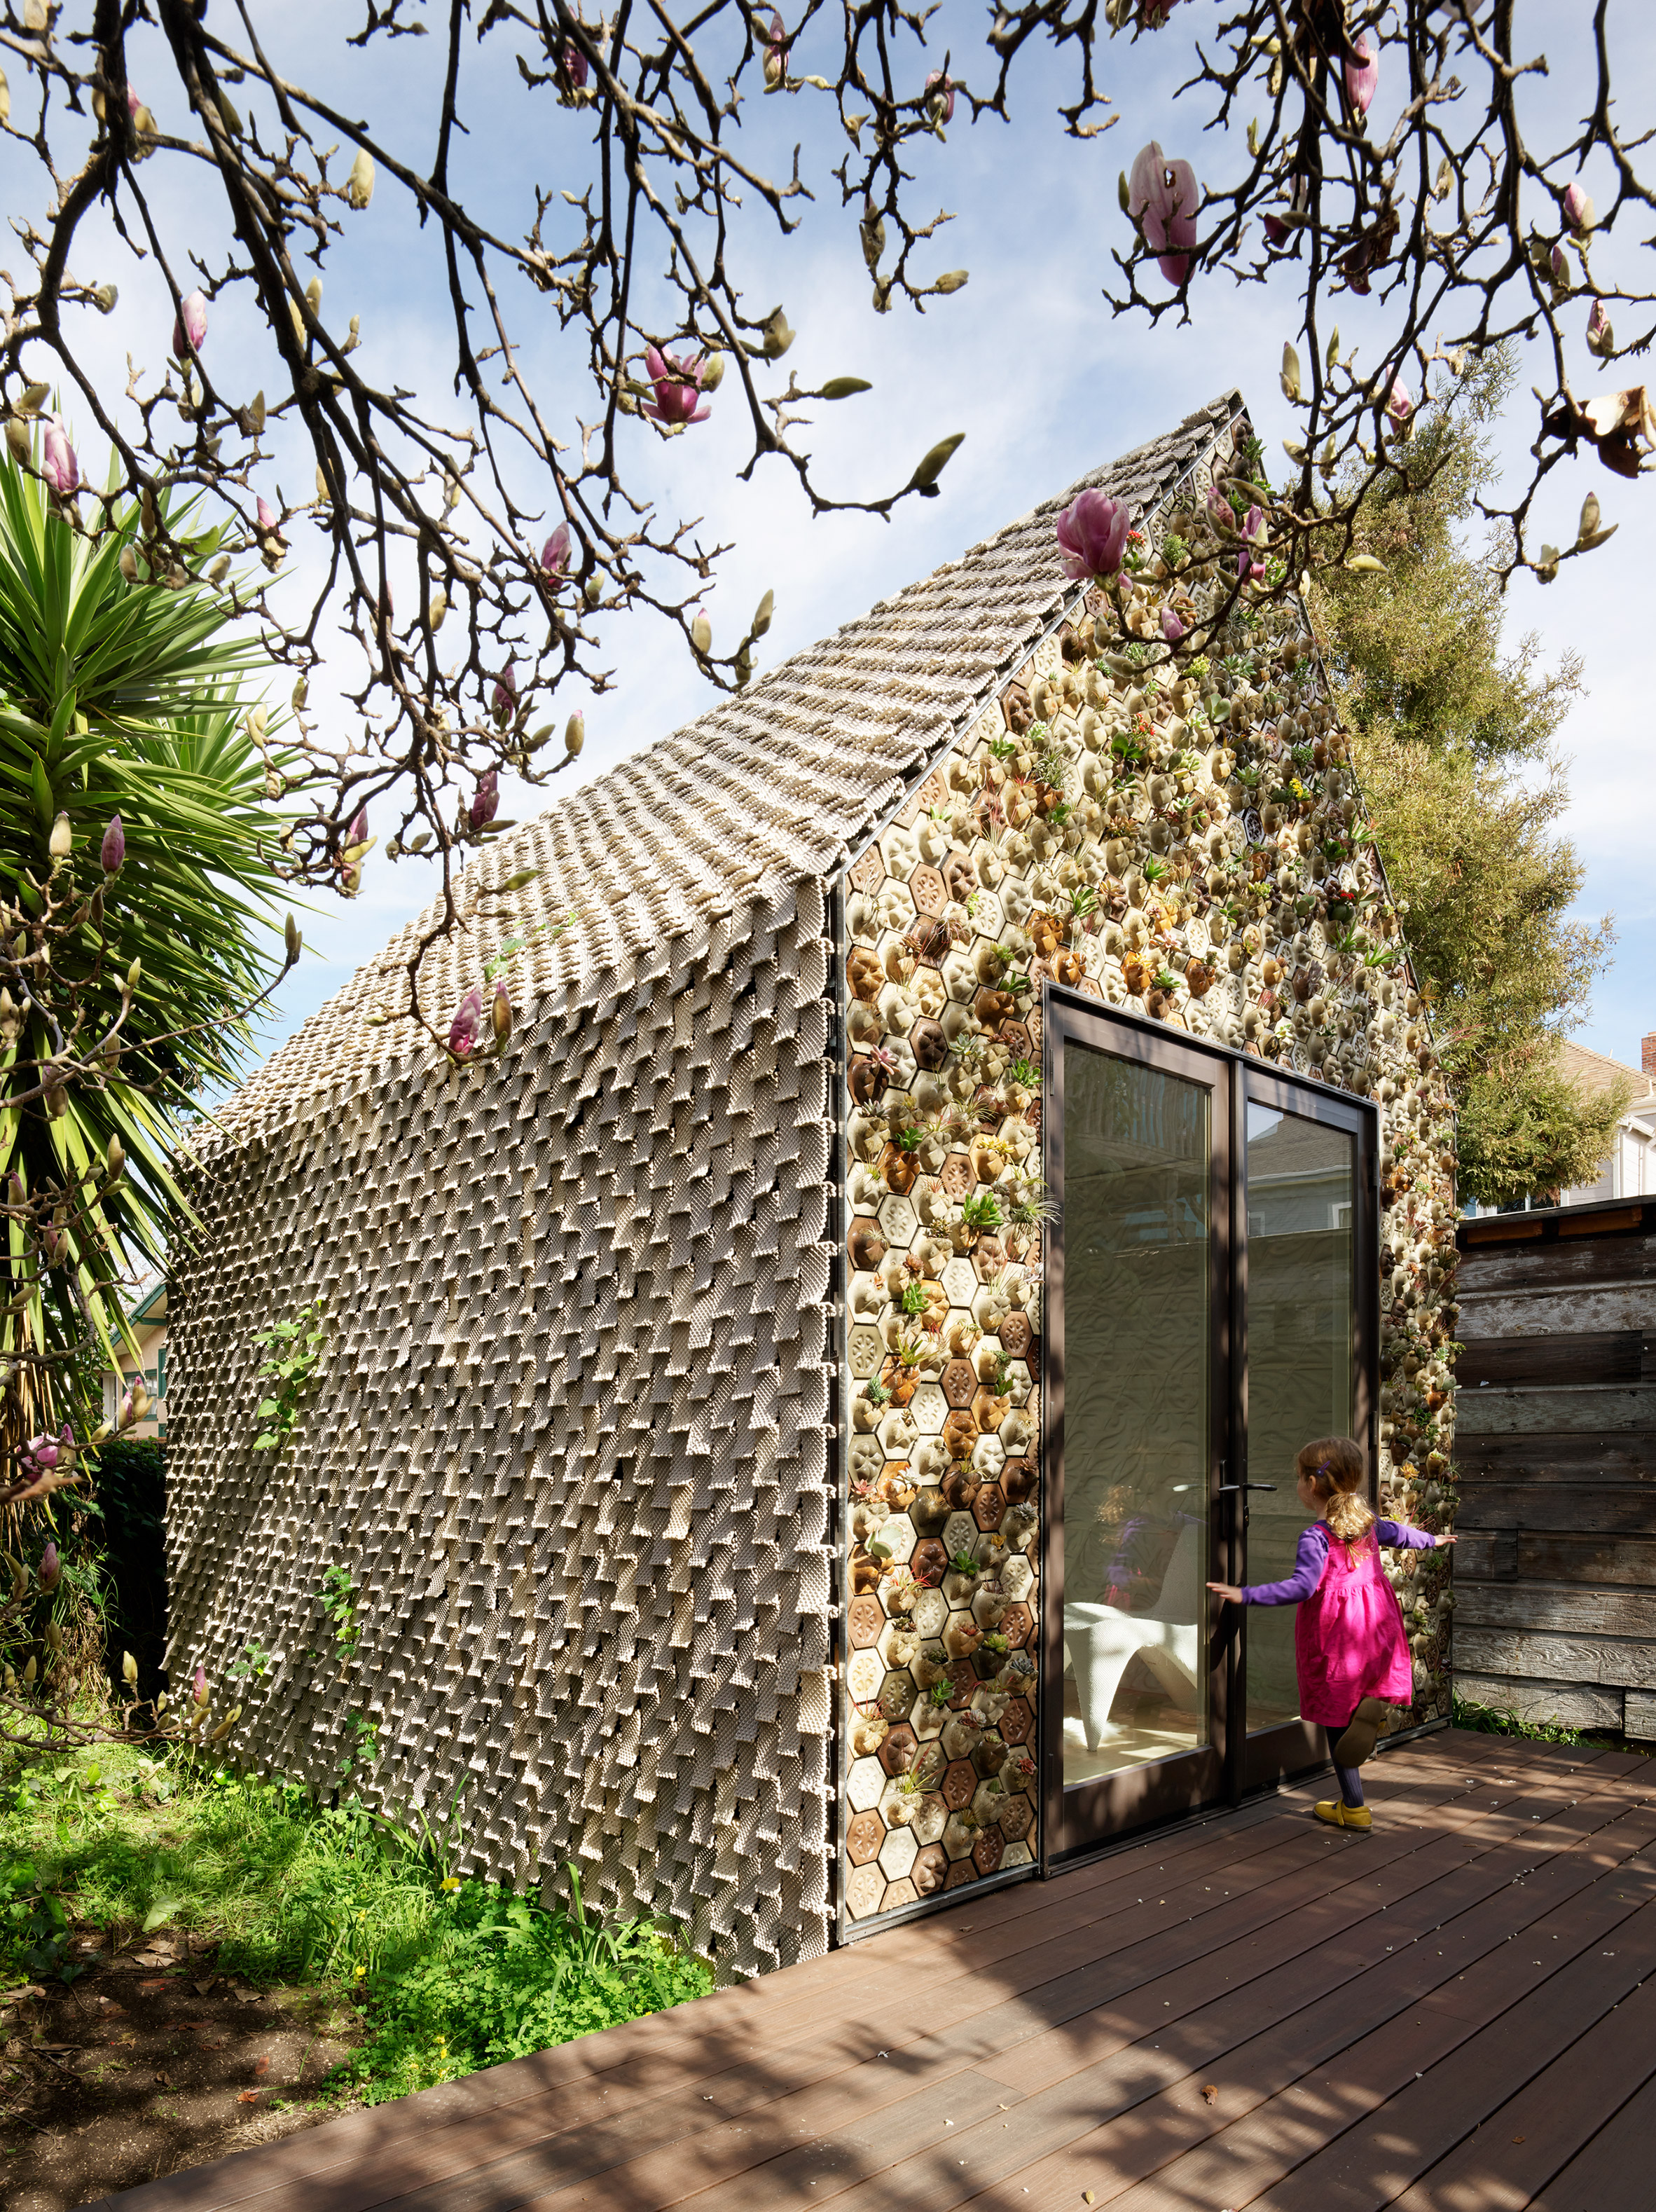 3D-printed tiles filled with succulents form cabin by Emerging Objects